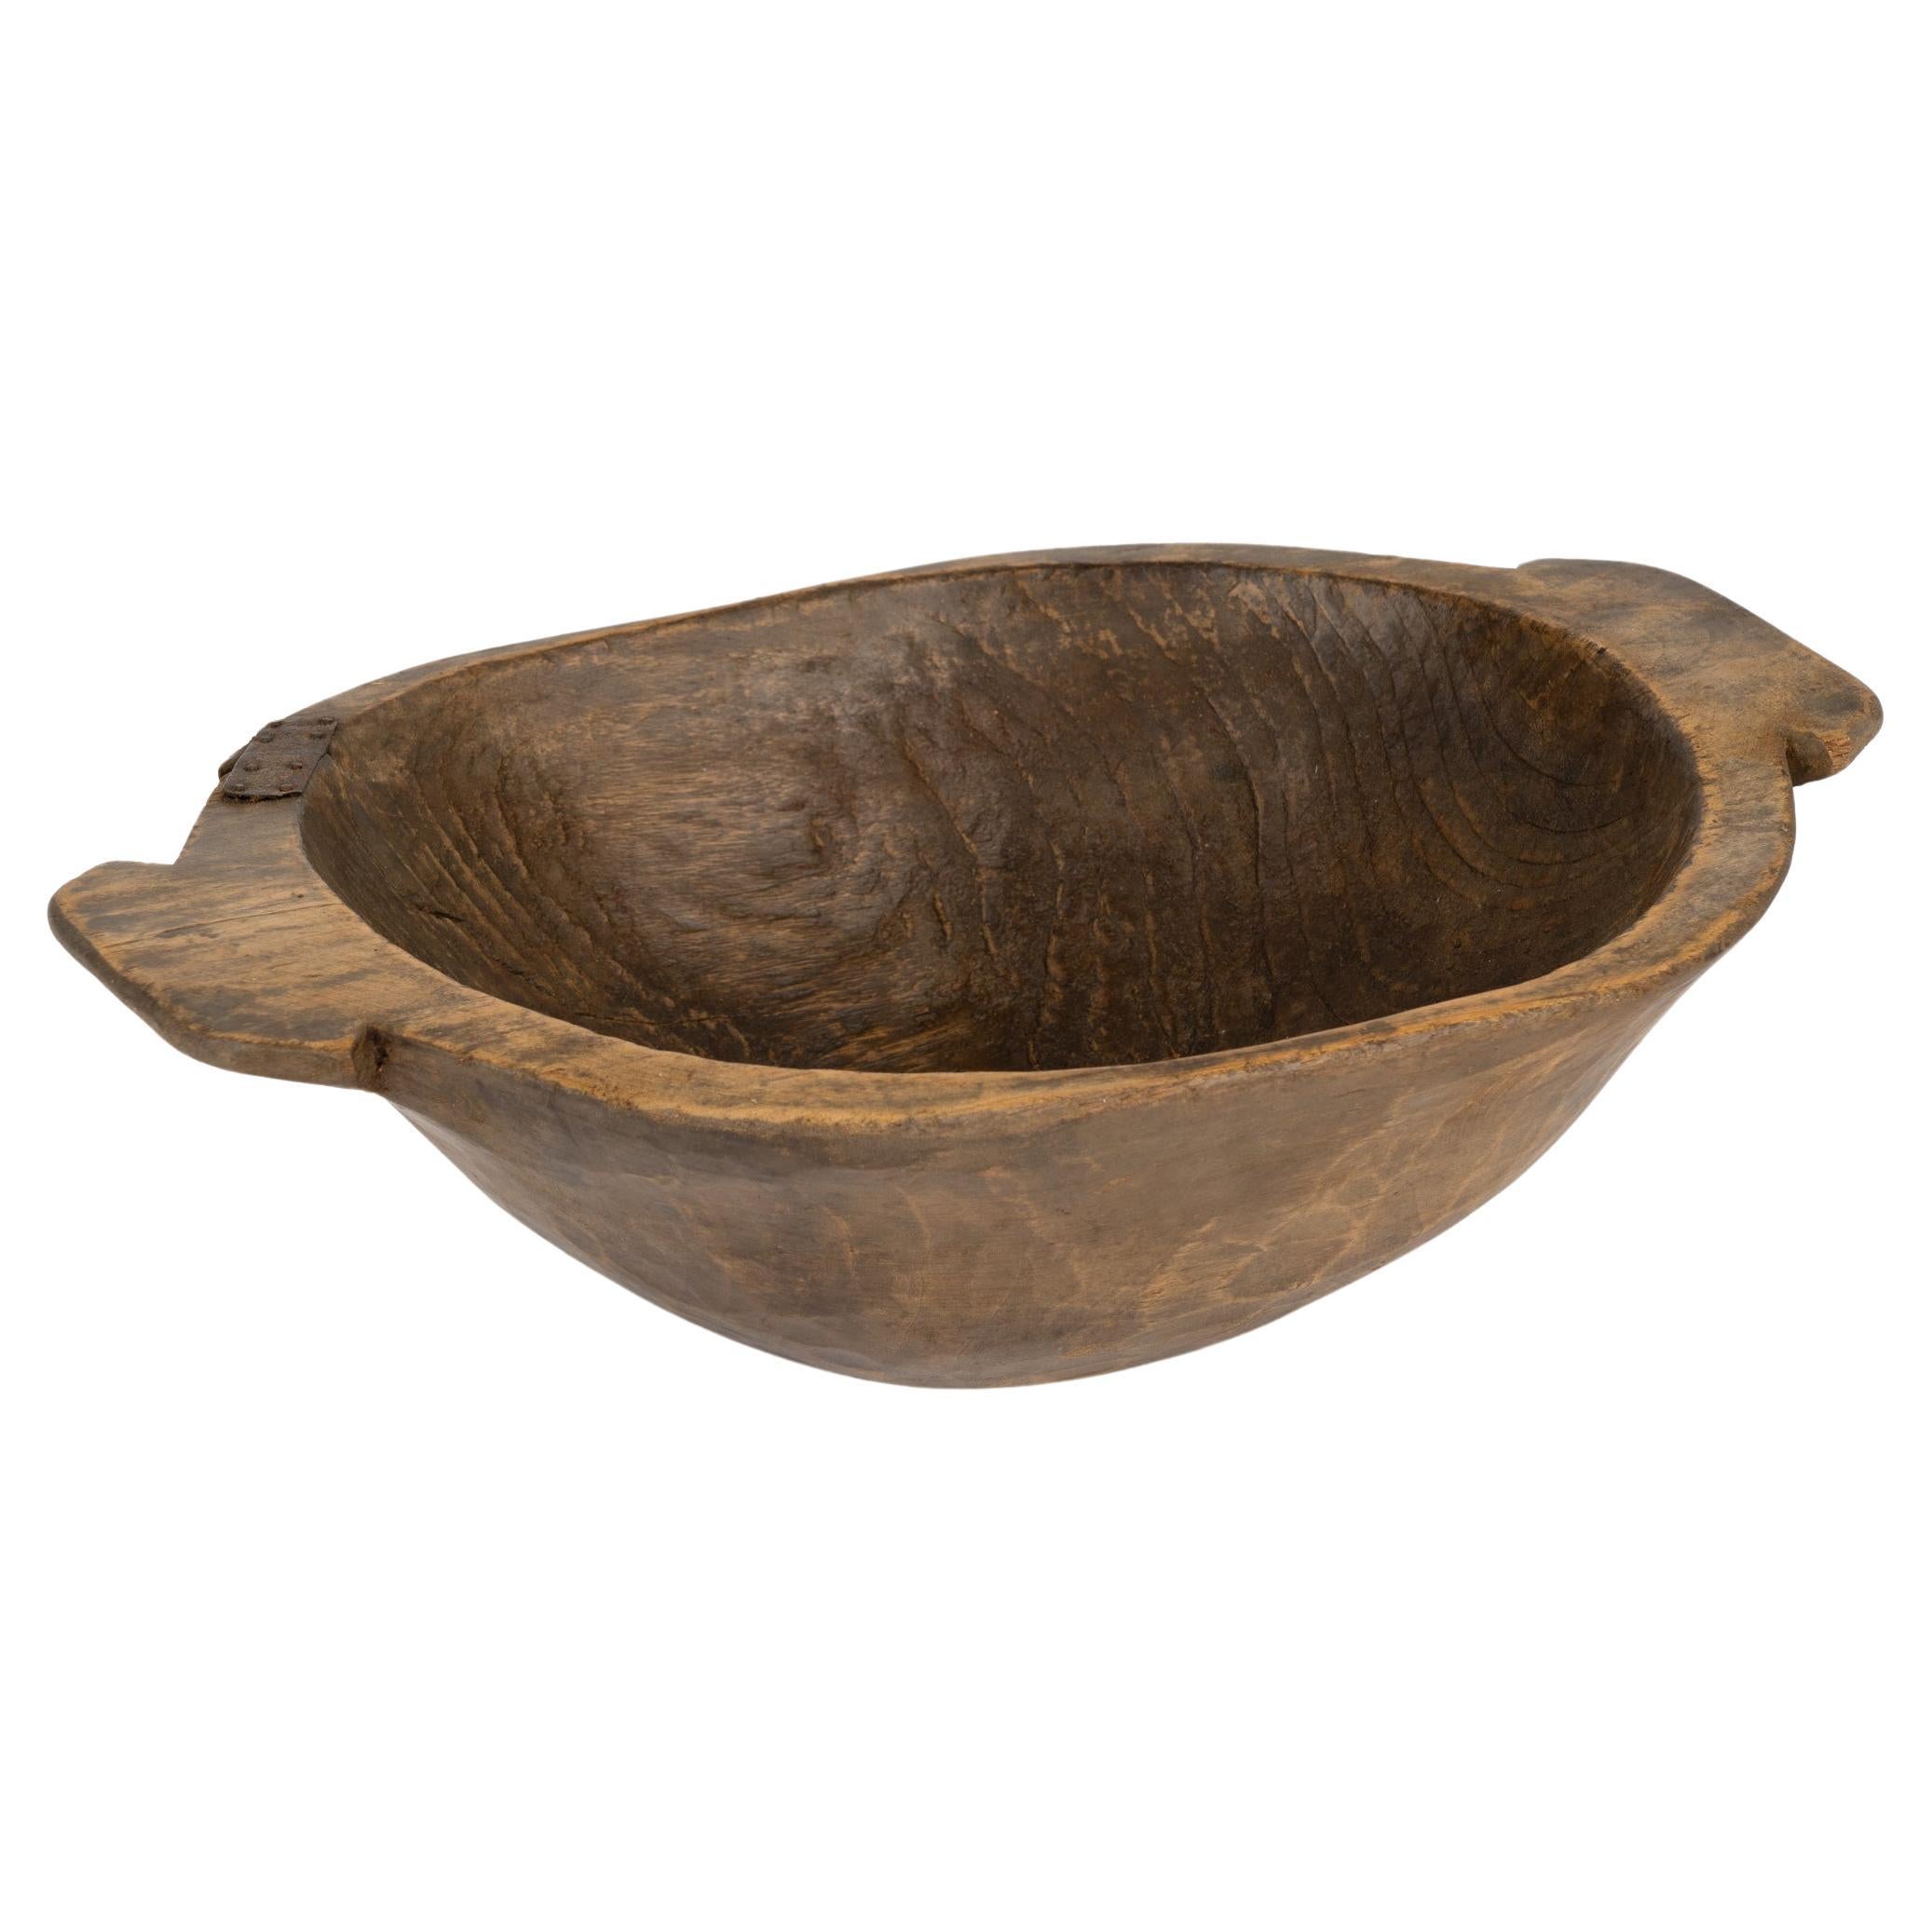 Antique Hand Hewn Wooden Bowl, Hungary circa 1880